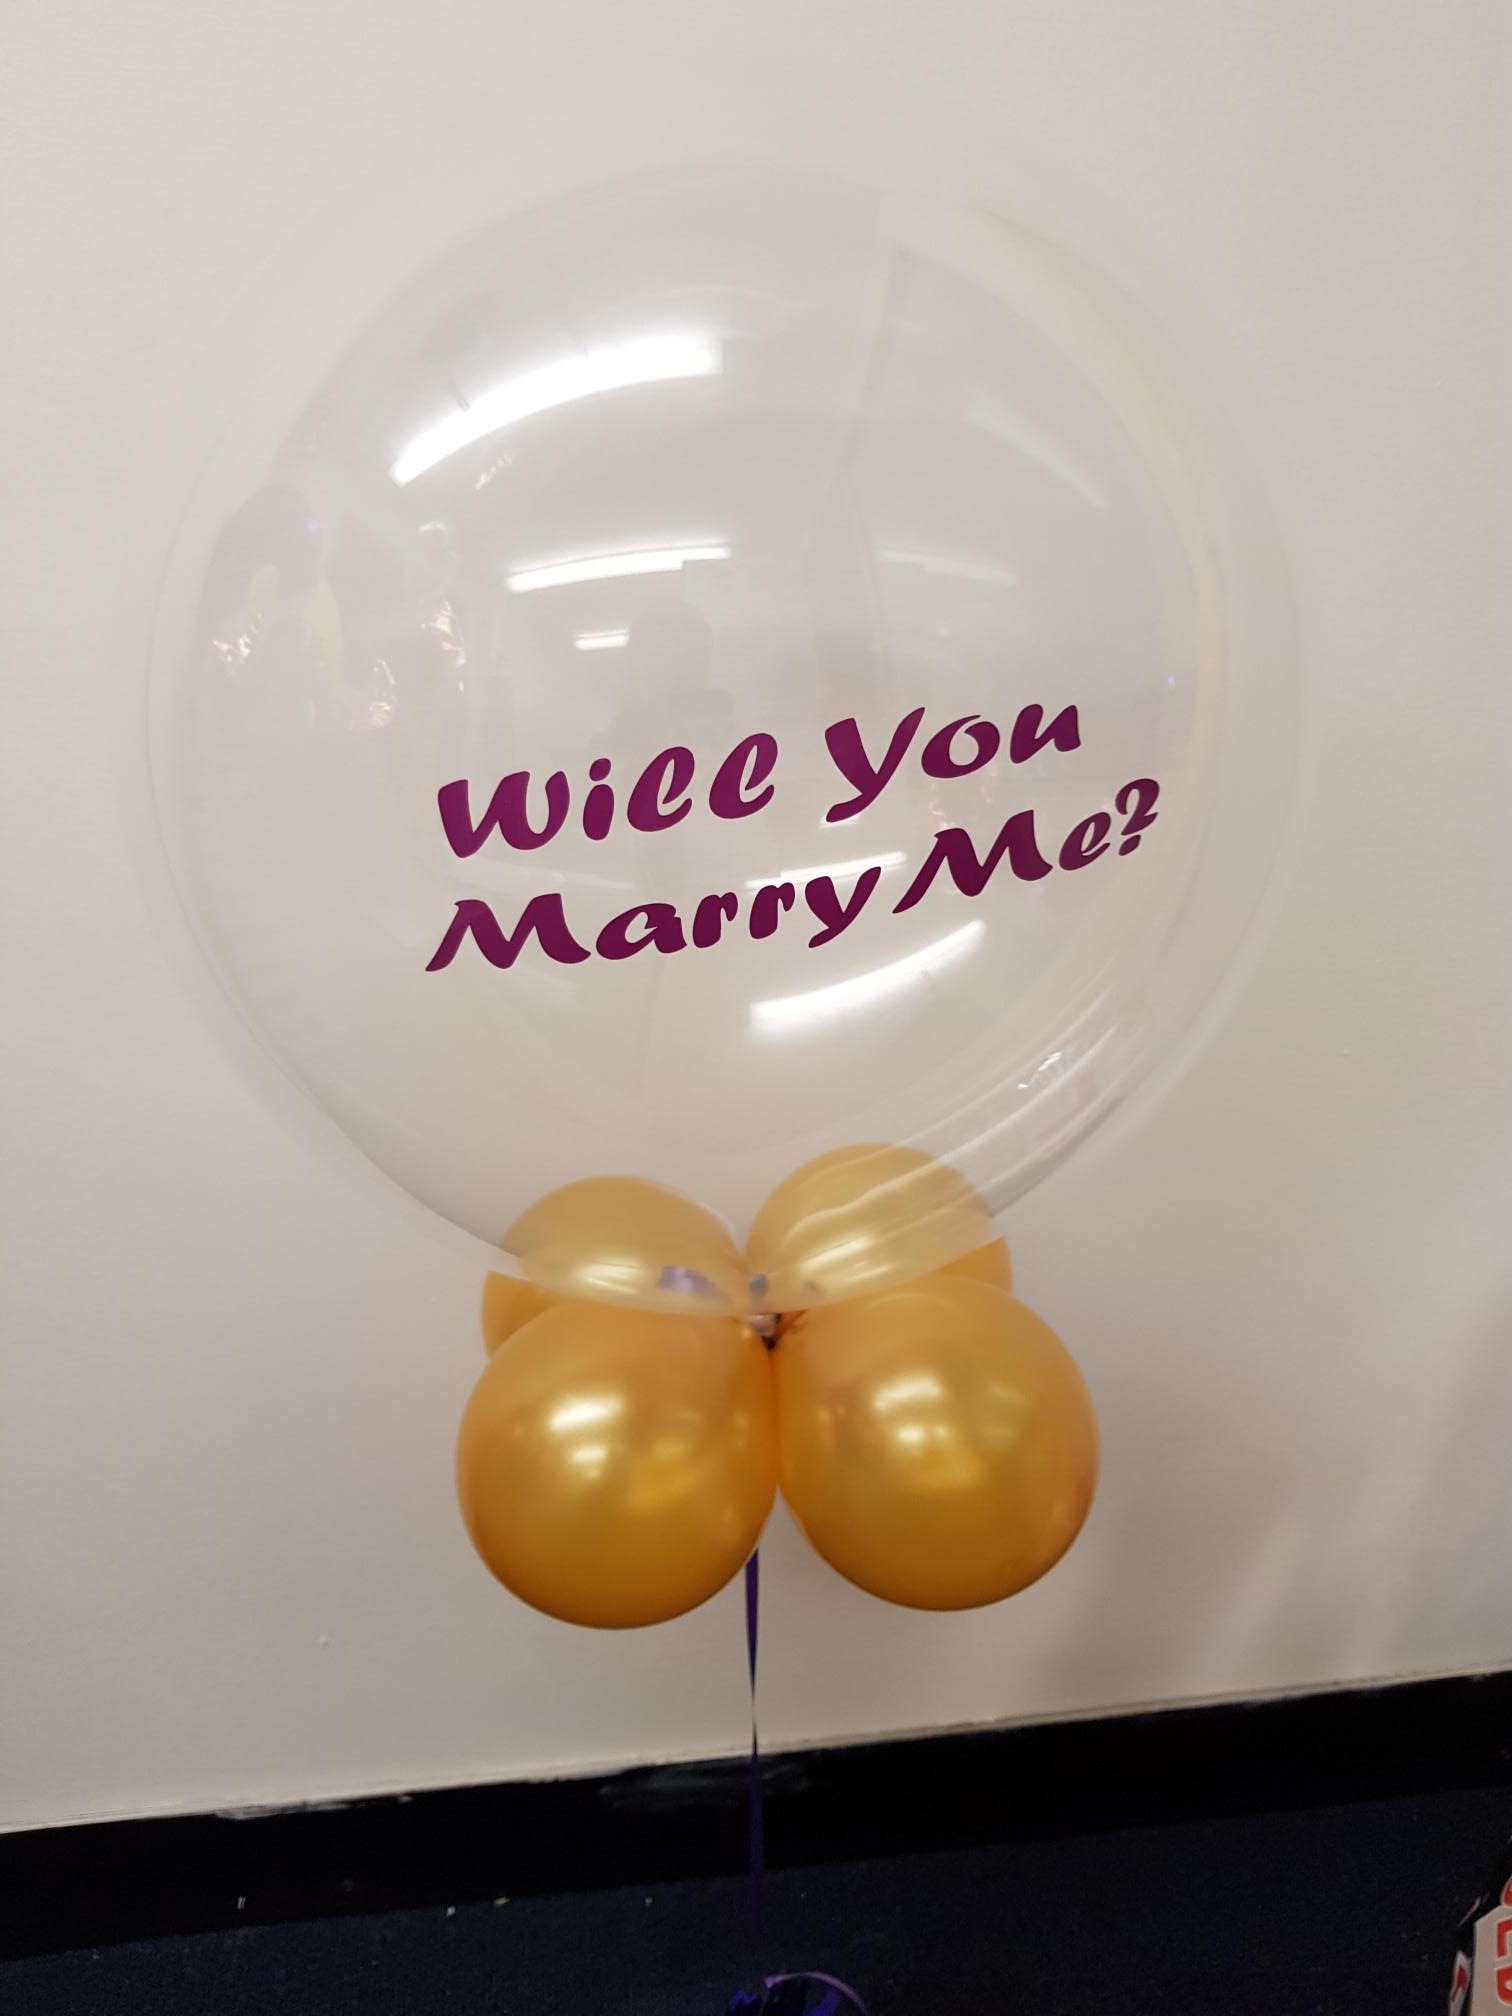 Personalised 'Will You Be My' Proposal Bubble Balloon